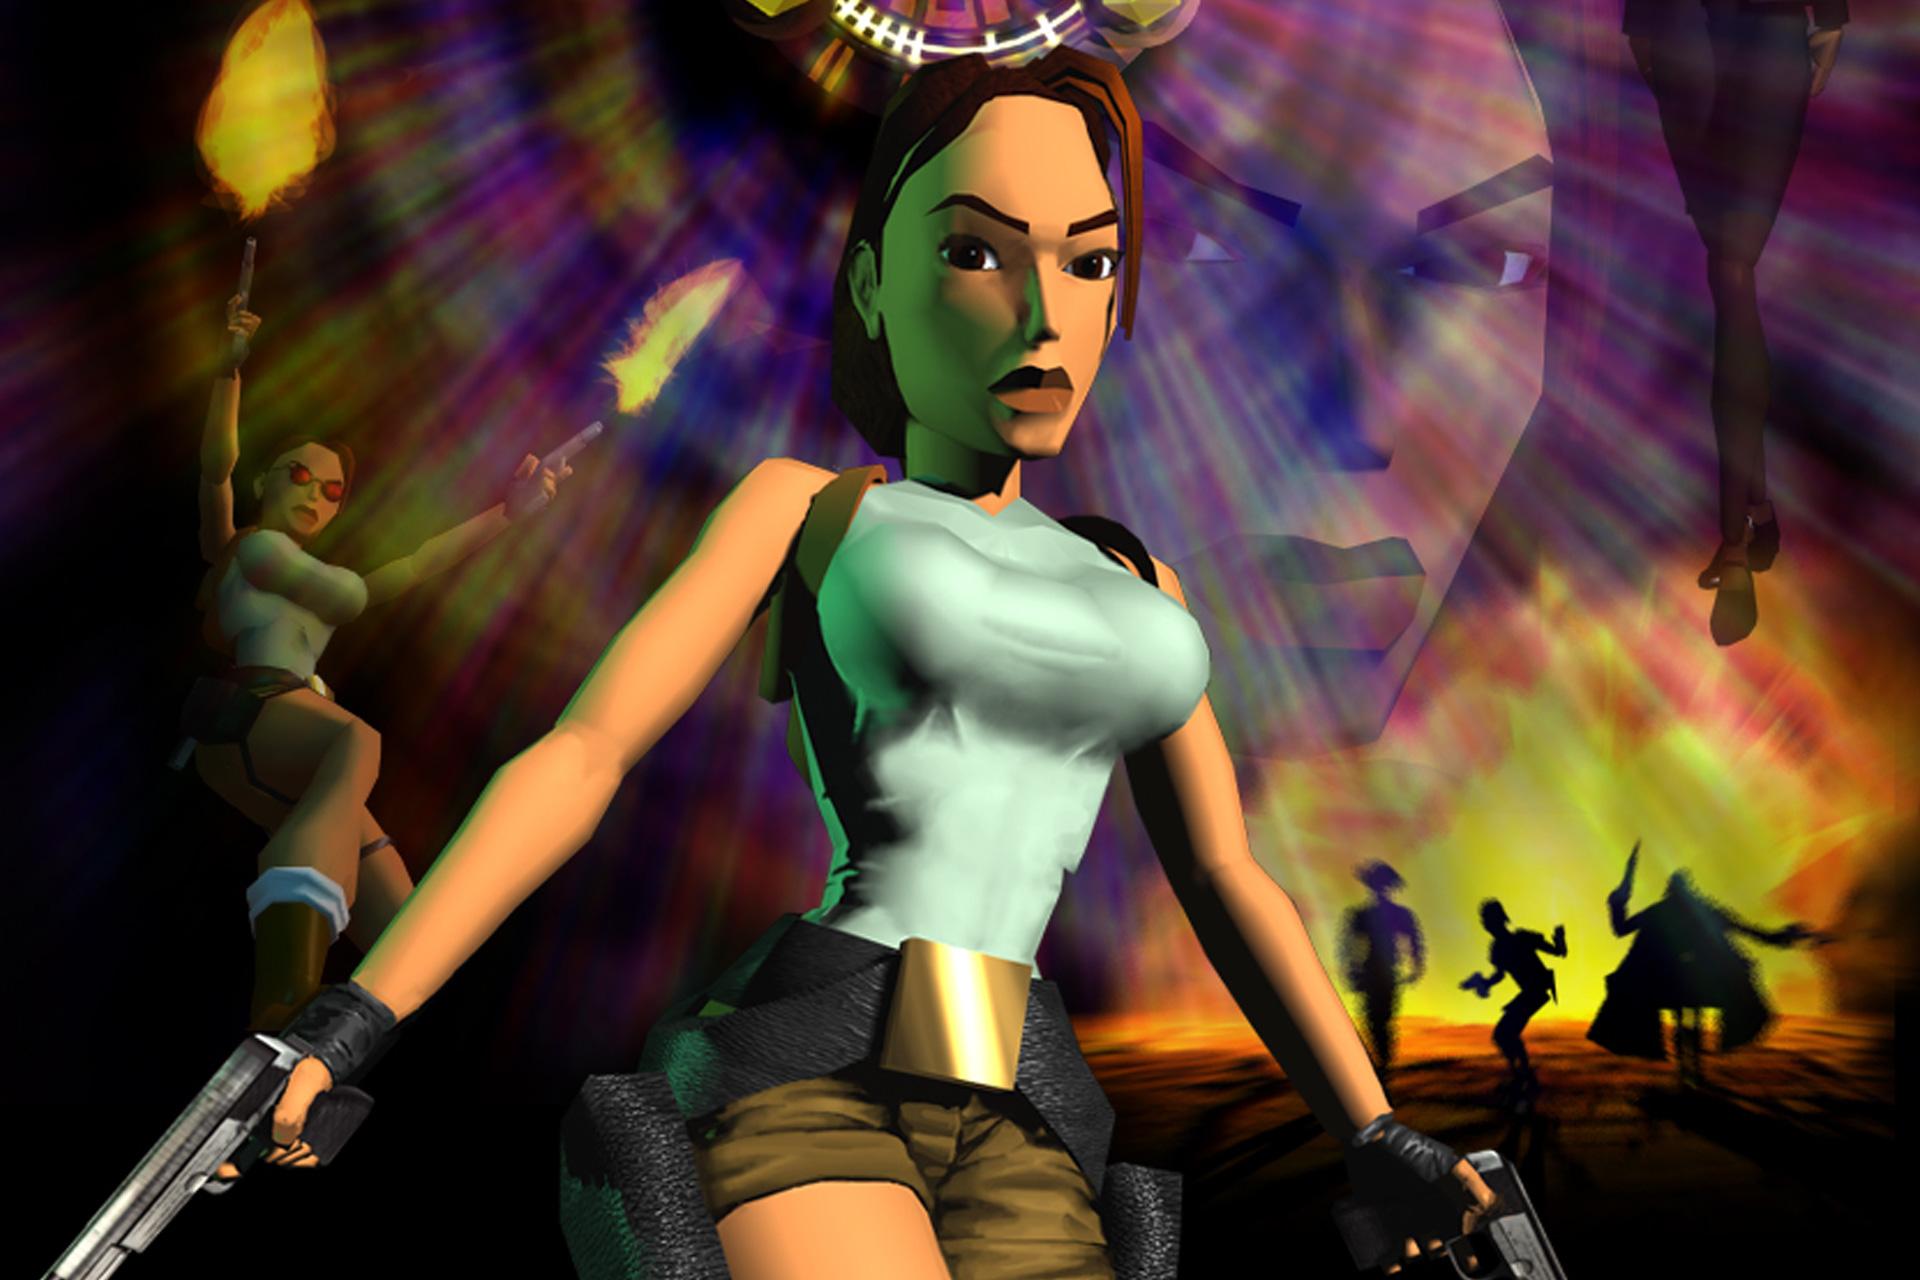 Lara Croft as depicted on the cover of Tomb Raider (1996) 